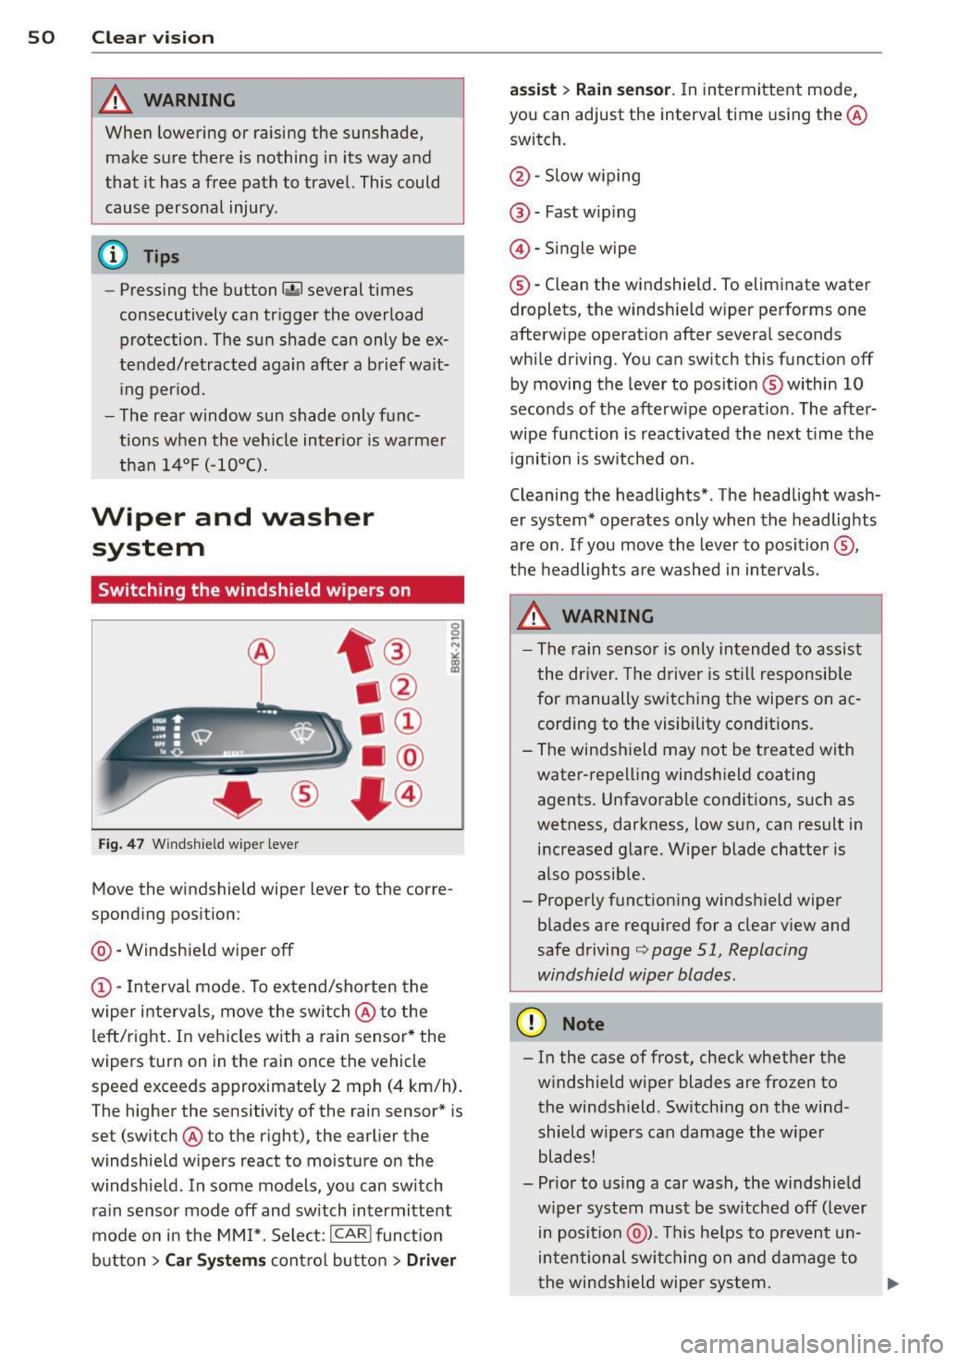 AUDI A4 SEDAN 2013  Owners Manual 50  Clear vis ion 
& WARNING 
When  lowering  or  raising  the  sunshade, 
make sure there  is nothing  in  its  way and 
that  it  has a free  path  to  travel.  This could 
cause personal  injury . 